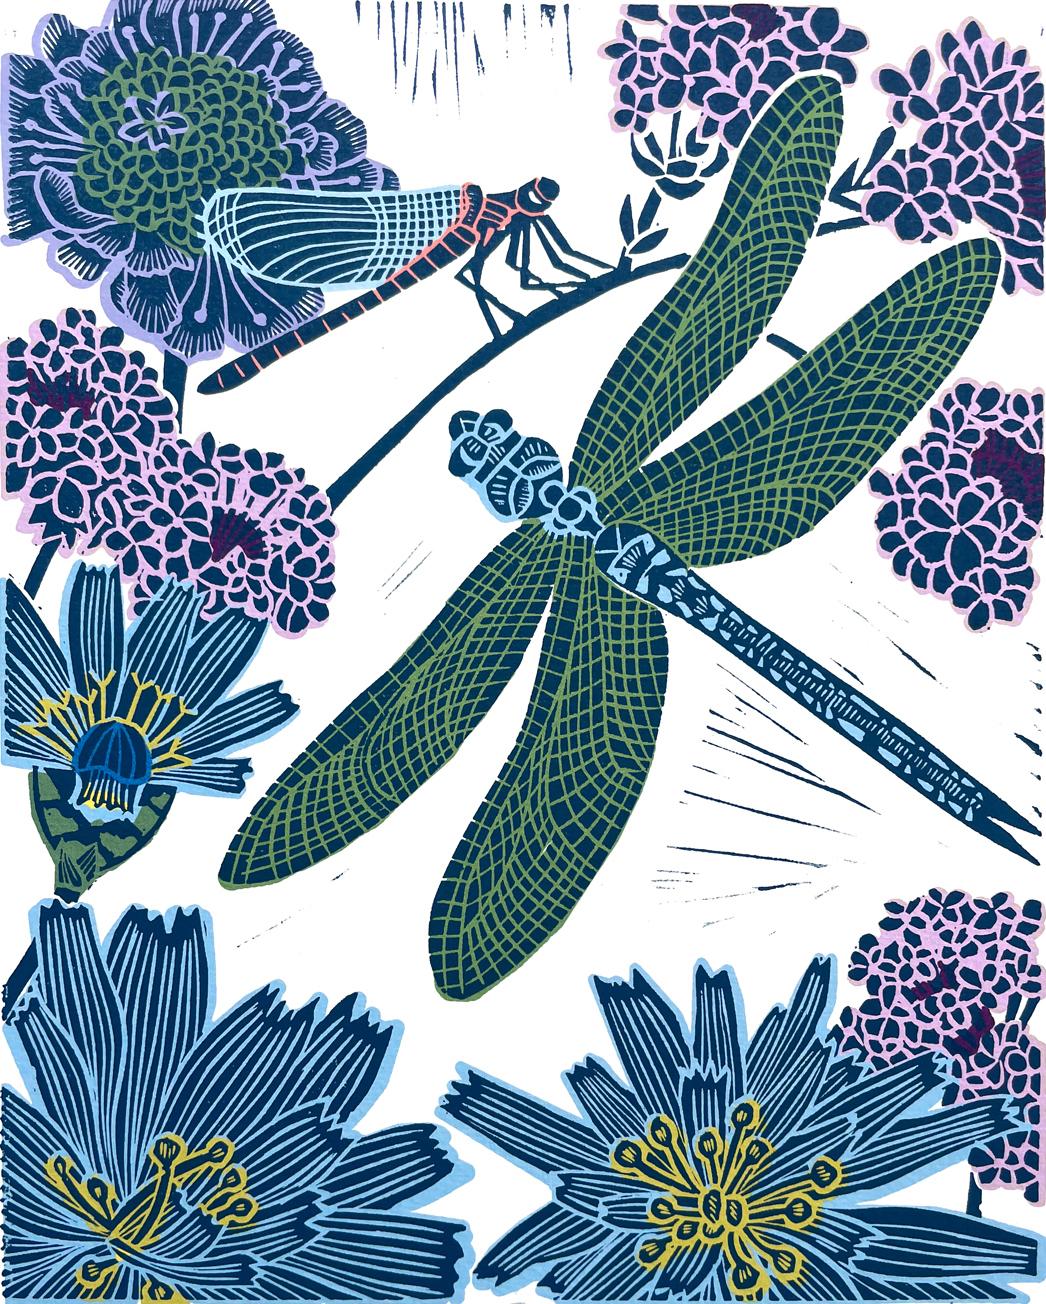 Kate Heiss Animal Print - Blue Emperor, Linocut, Limited edition print, Dragonfly, Nature, Floral, Purple